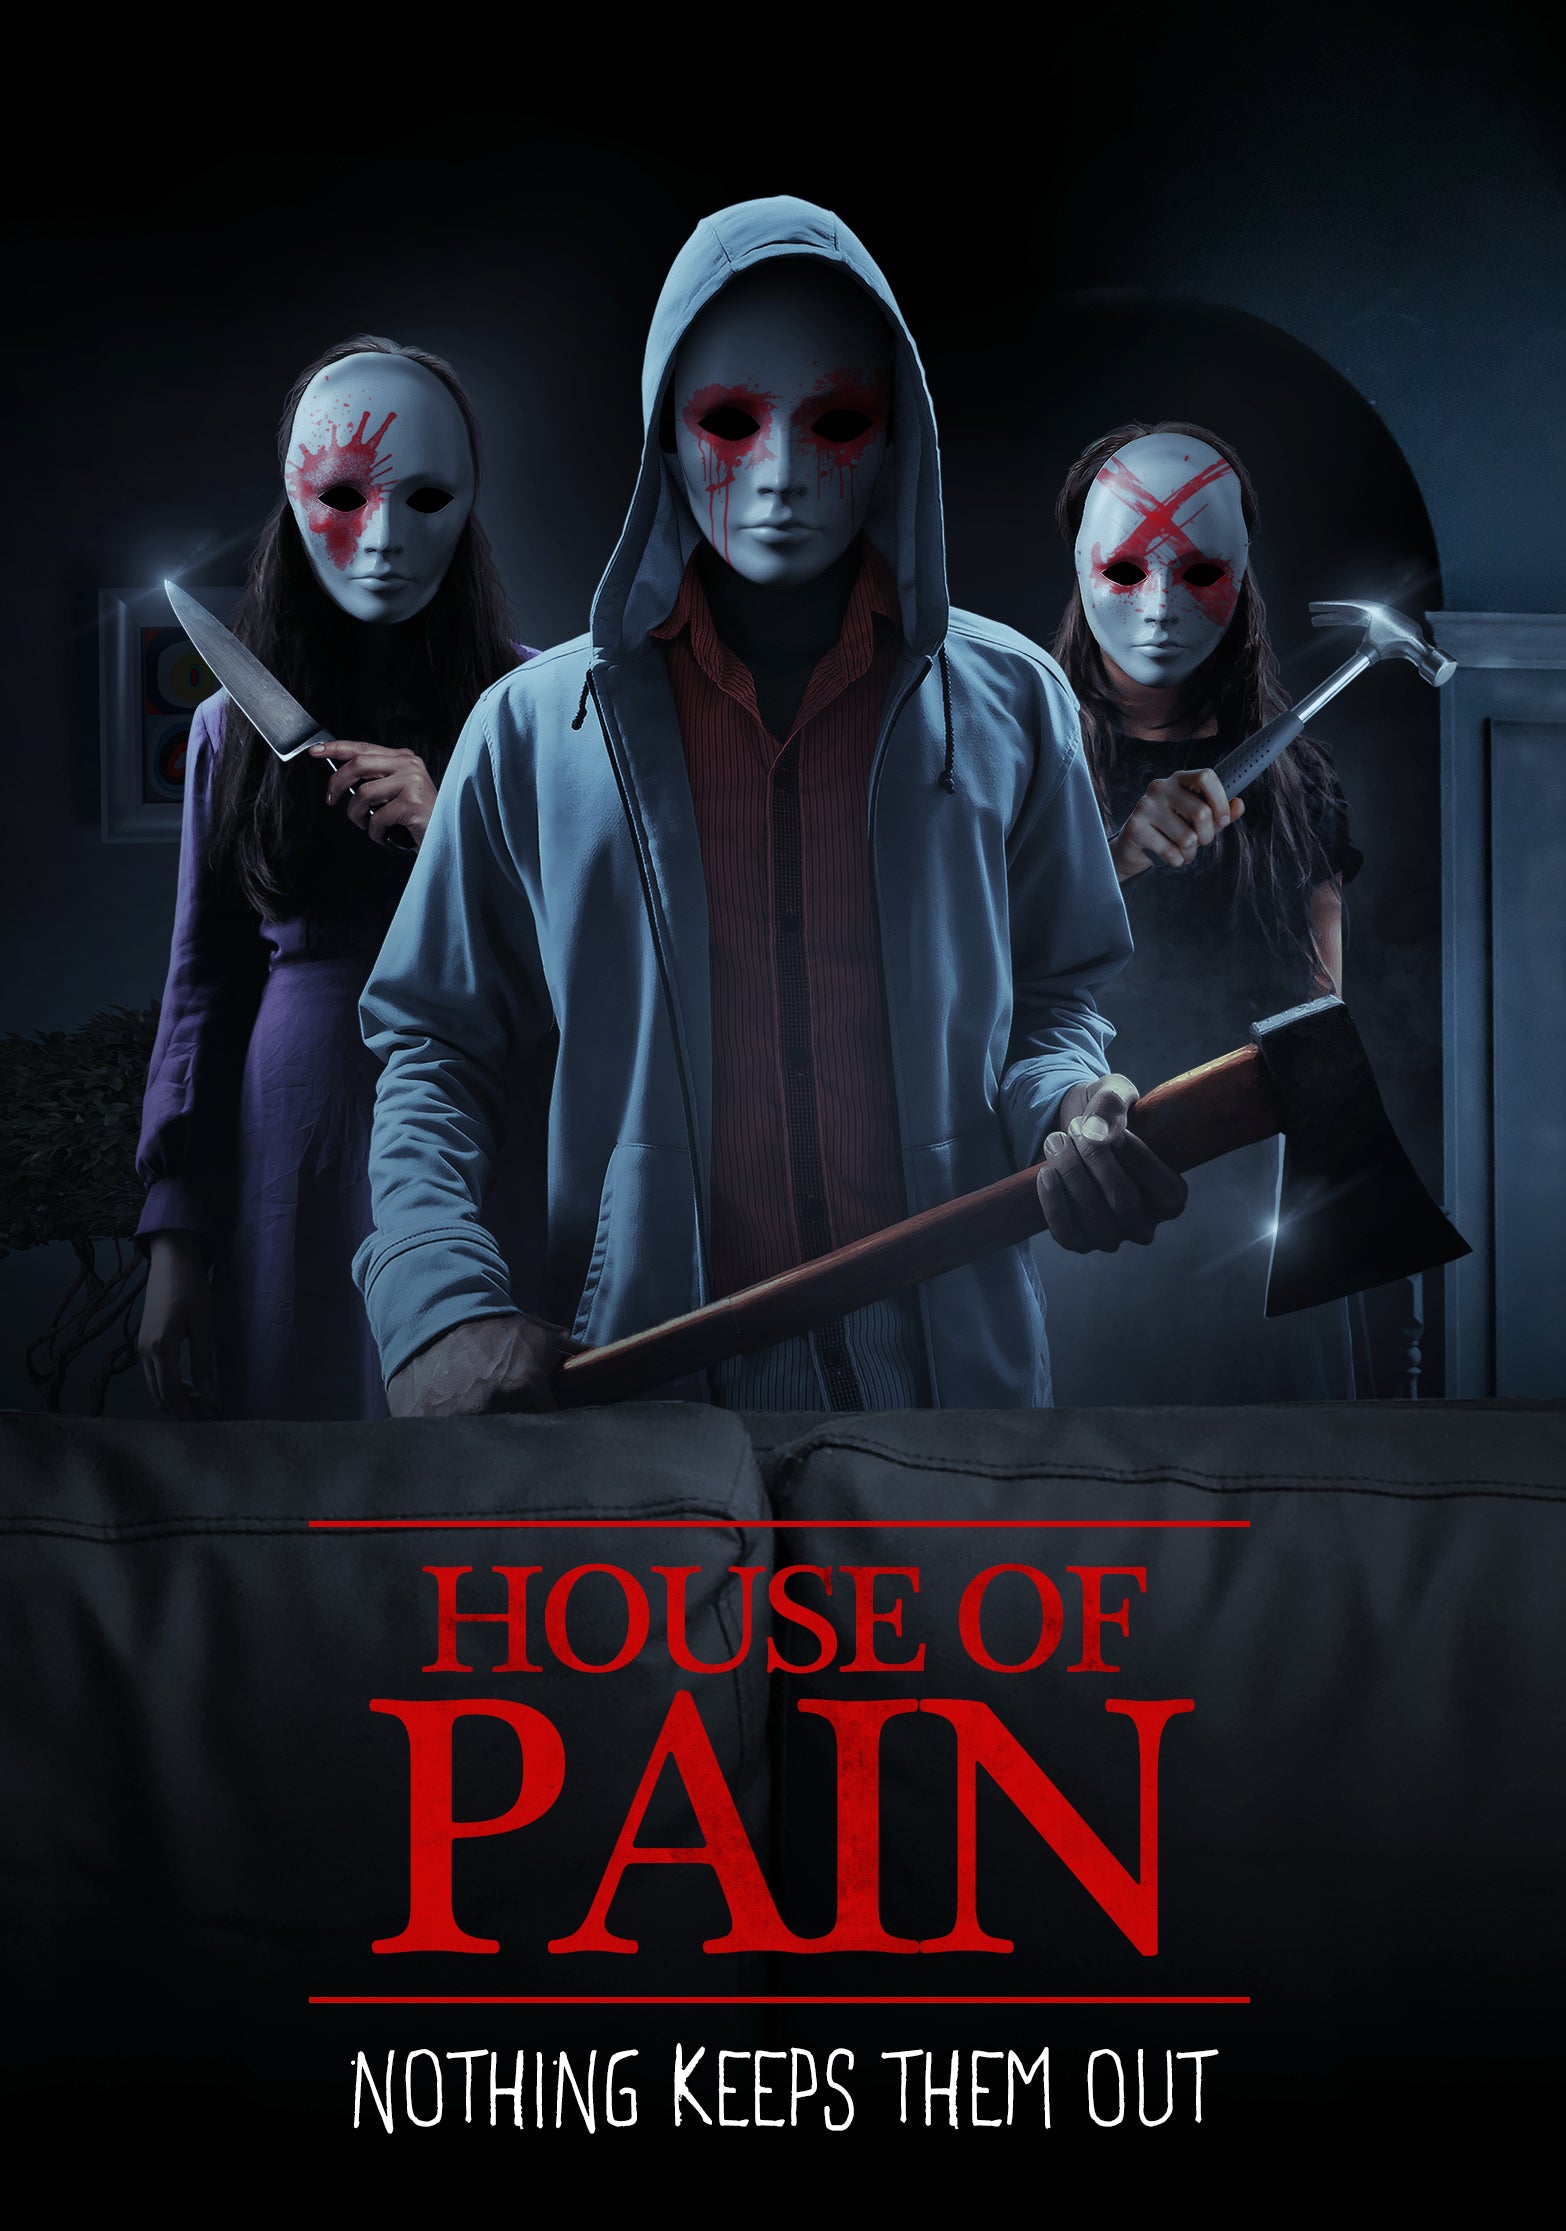 HOUSE OF PAIN DVD